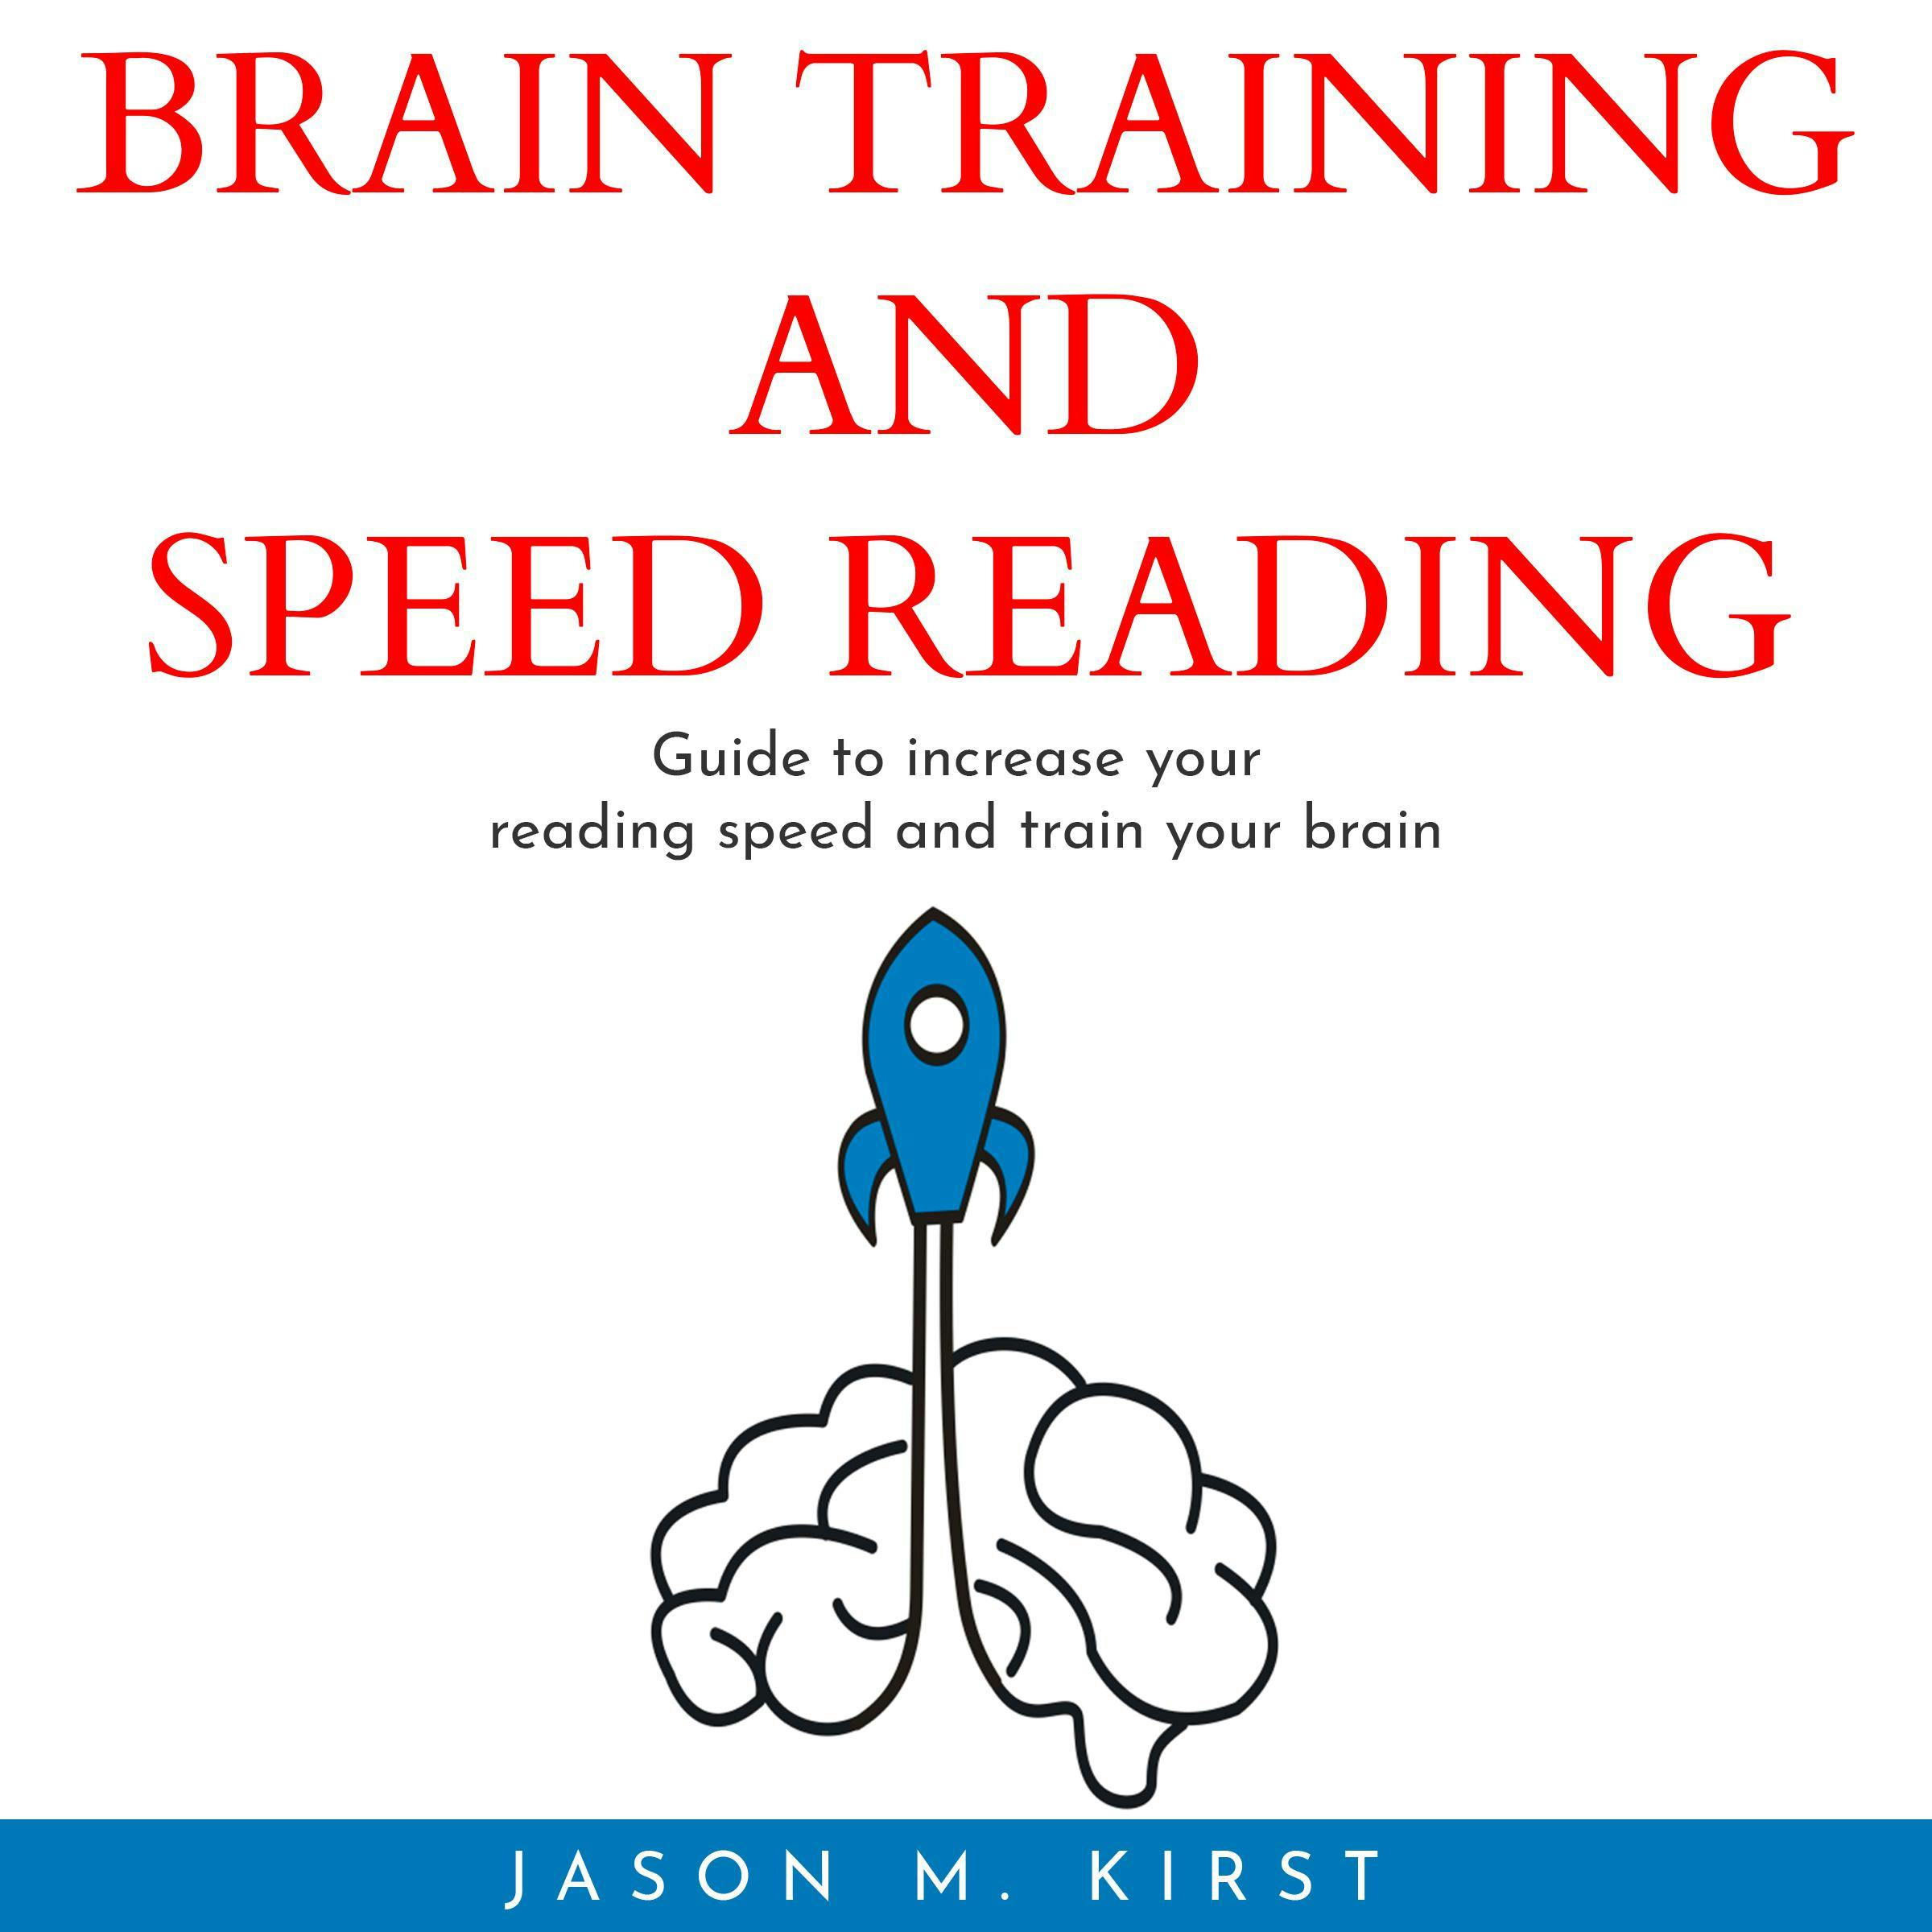 BRAIN TRAINING AND SPEED READING : Guide to increase your reading speed and train your brain - Jason M. Kirst